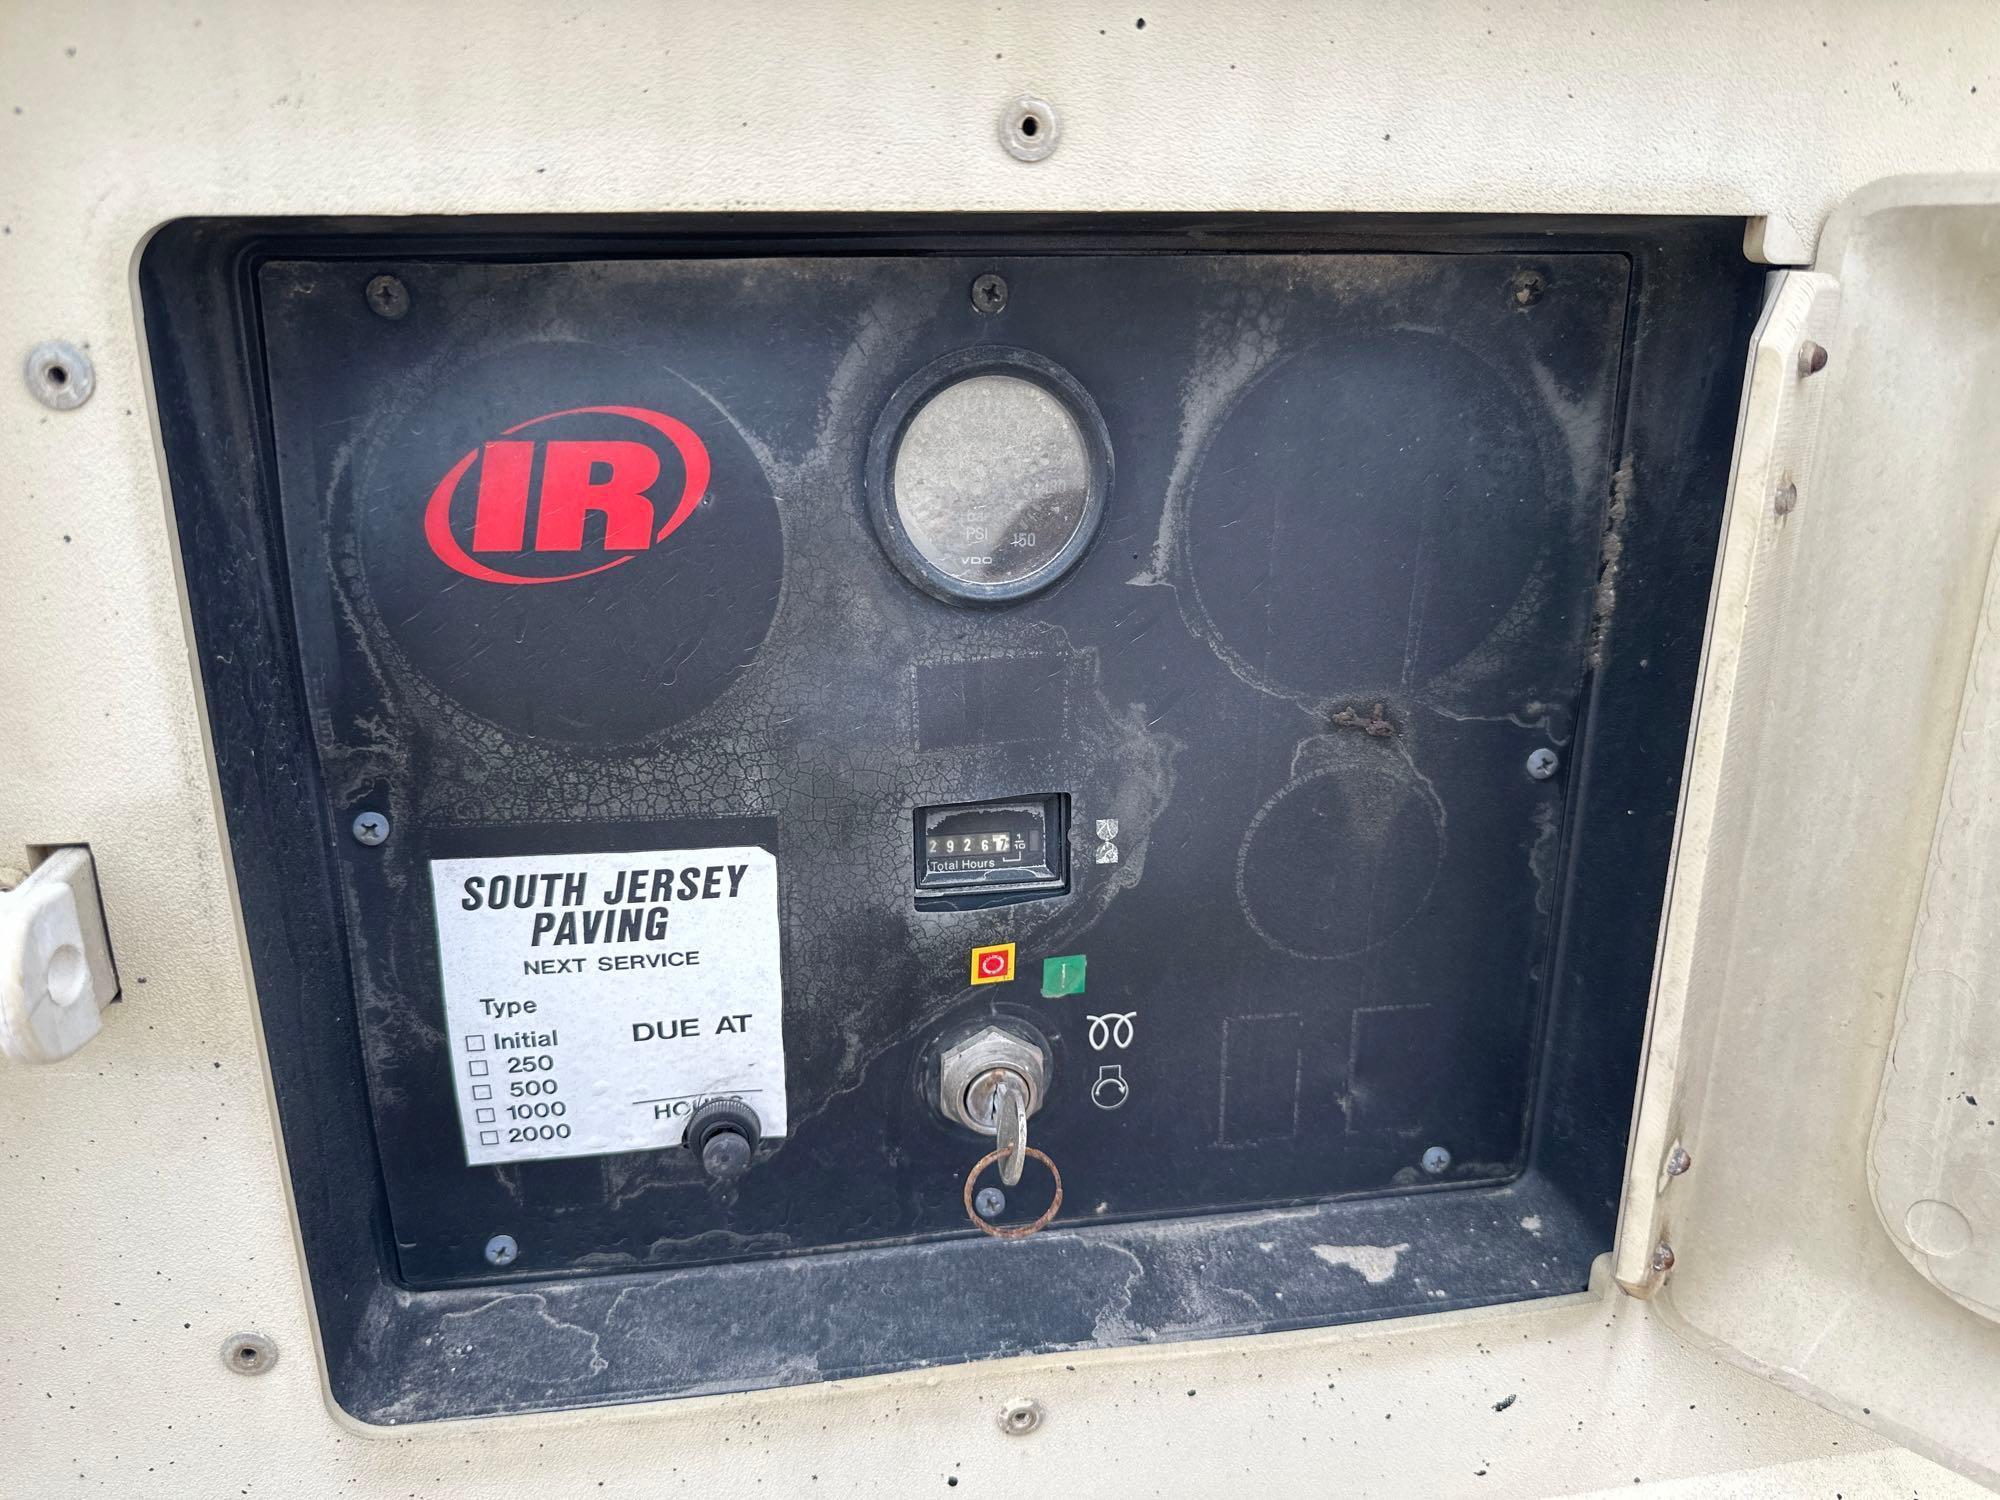 INGERSOLL RAND 185CFM AIR COMPRESSOR powered by diesel engine, equipped with 185CFM, trailer